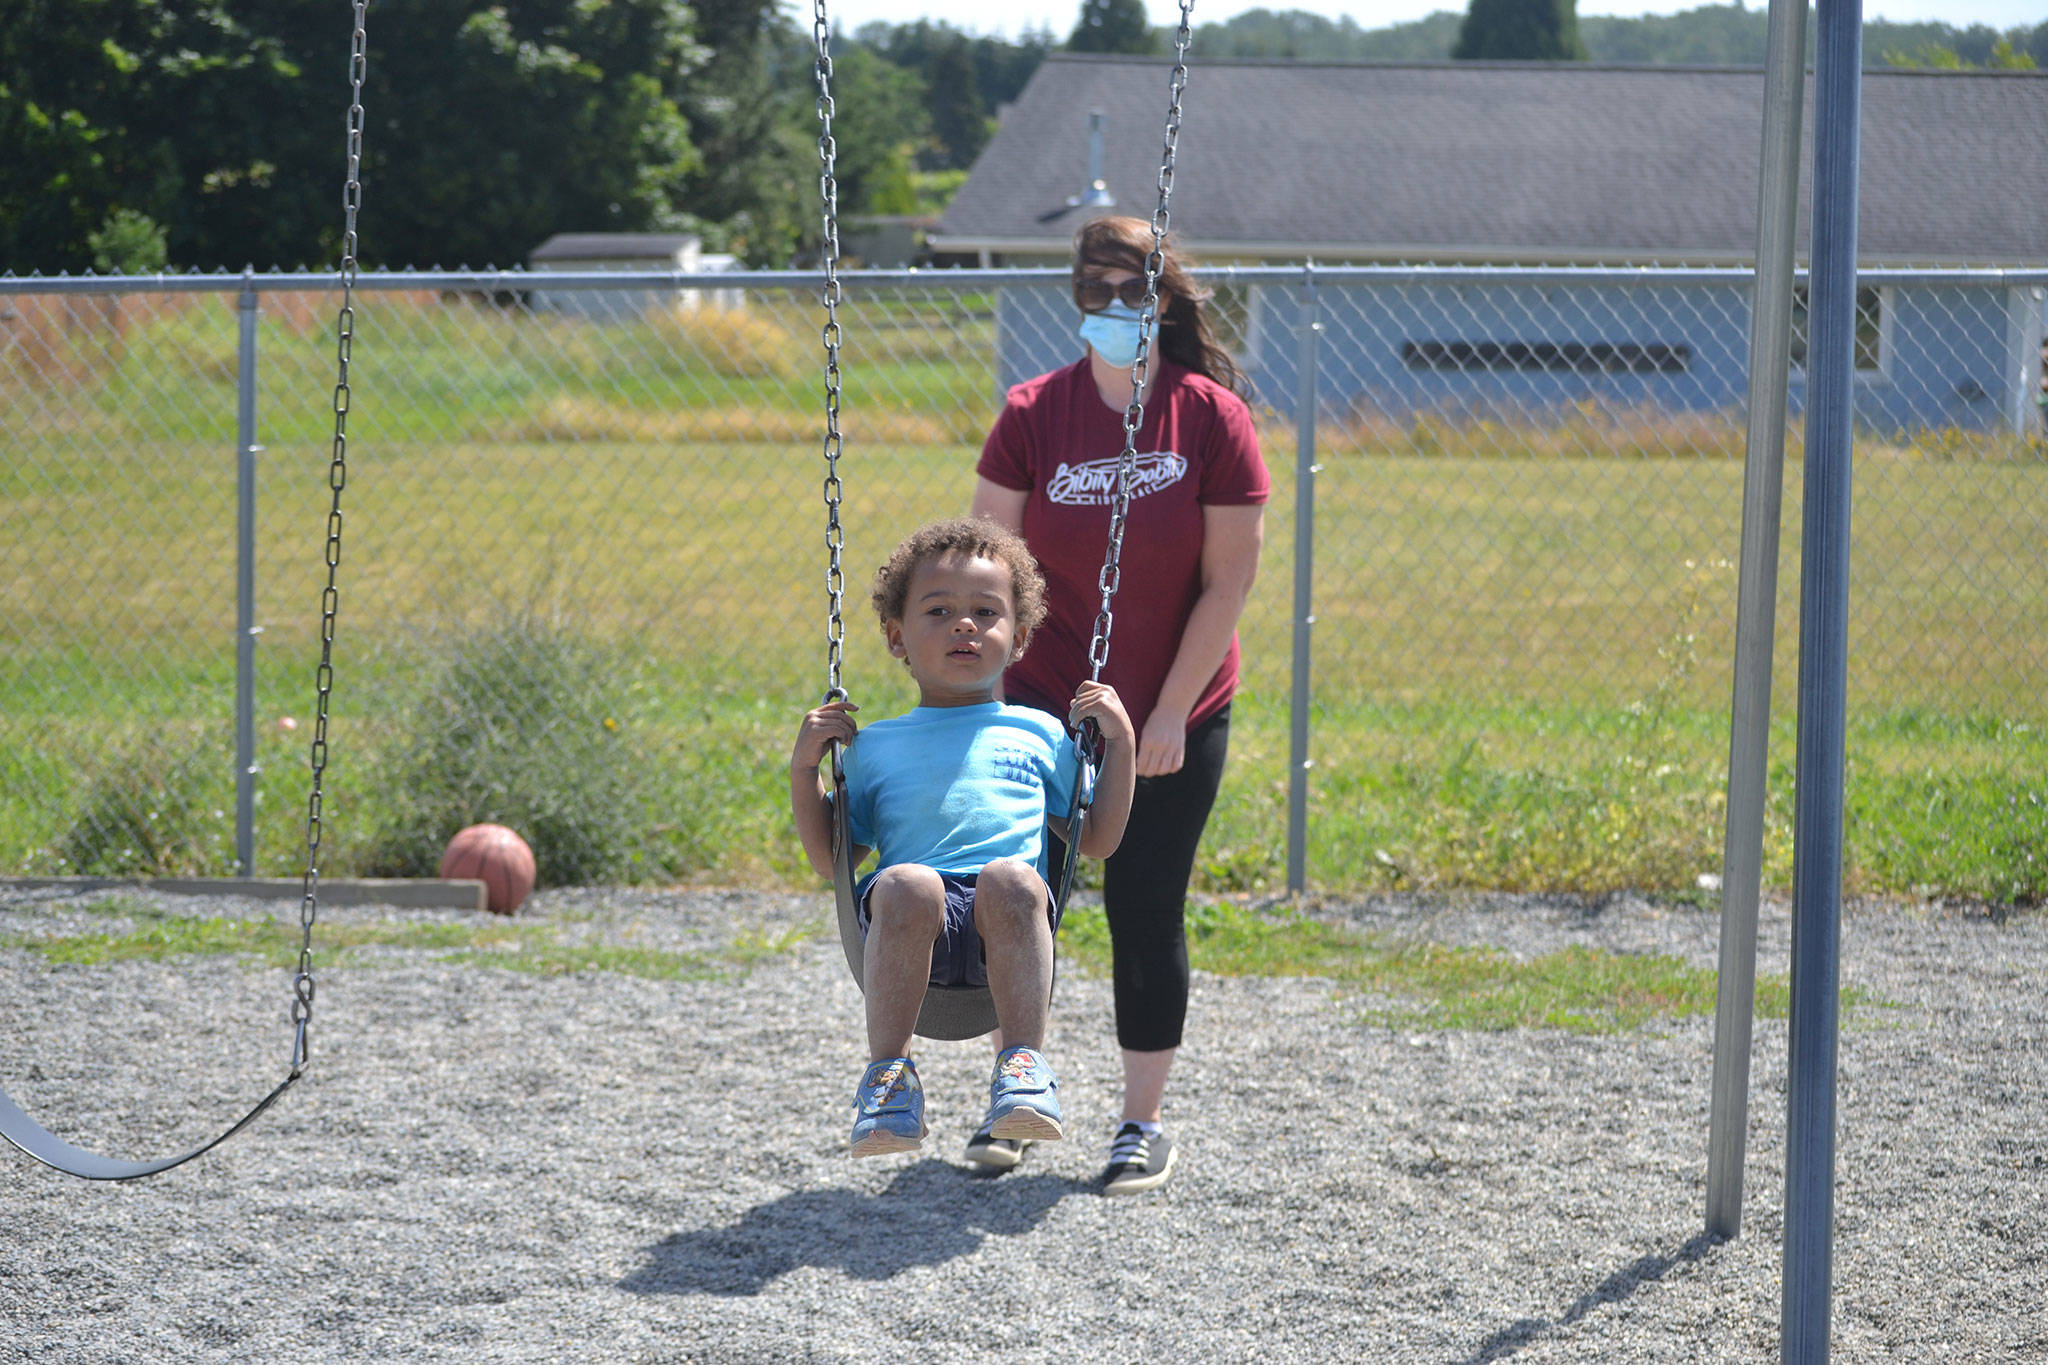 Sarah Schmedding plays with Harry Piper on the swings at Bibity Bobity last June. Space for child care has stayed mostly the same at Bibity Bobity in Carlsborg with school-aged children being the biggest shift, owner-director Nicole Goettling said. They used to come after school but now stay all day due to distance learning in-place during the pandemic. (Matthew Nash/Olympic Peninsula News Group file)